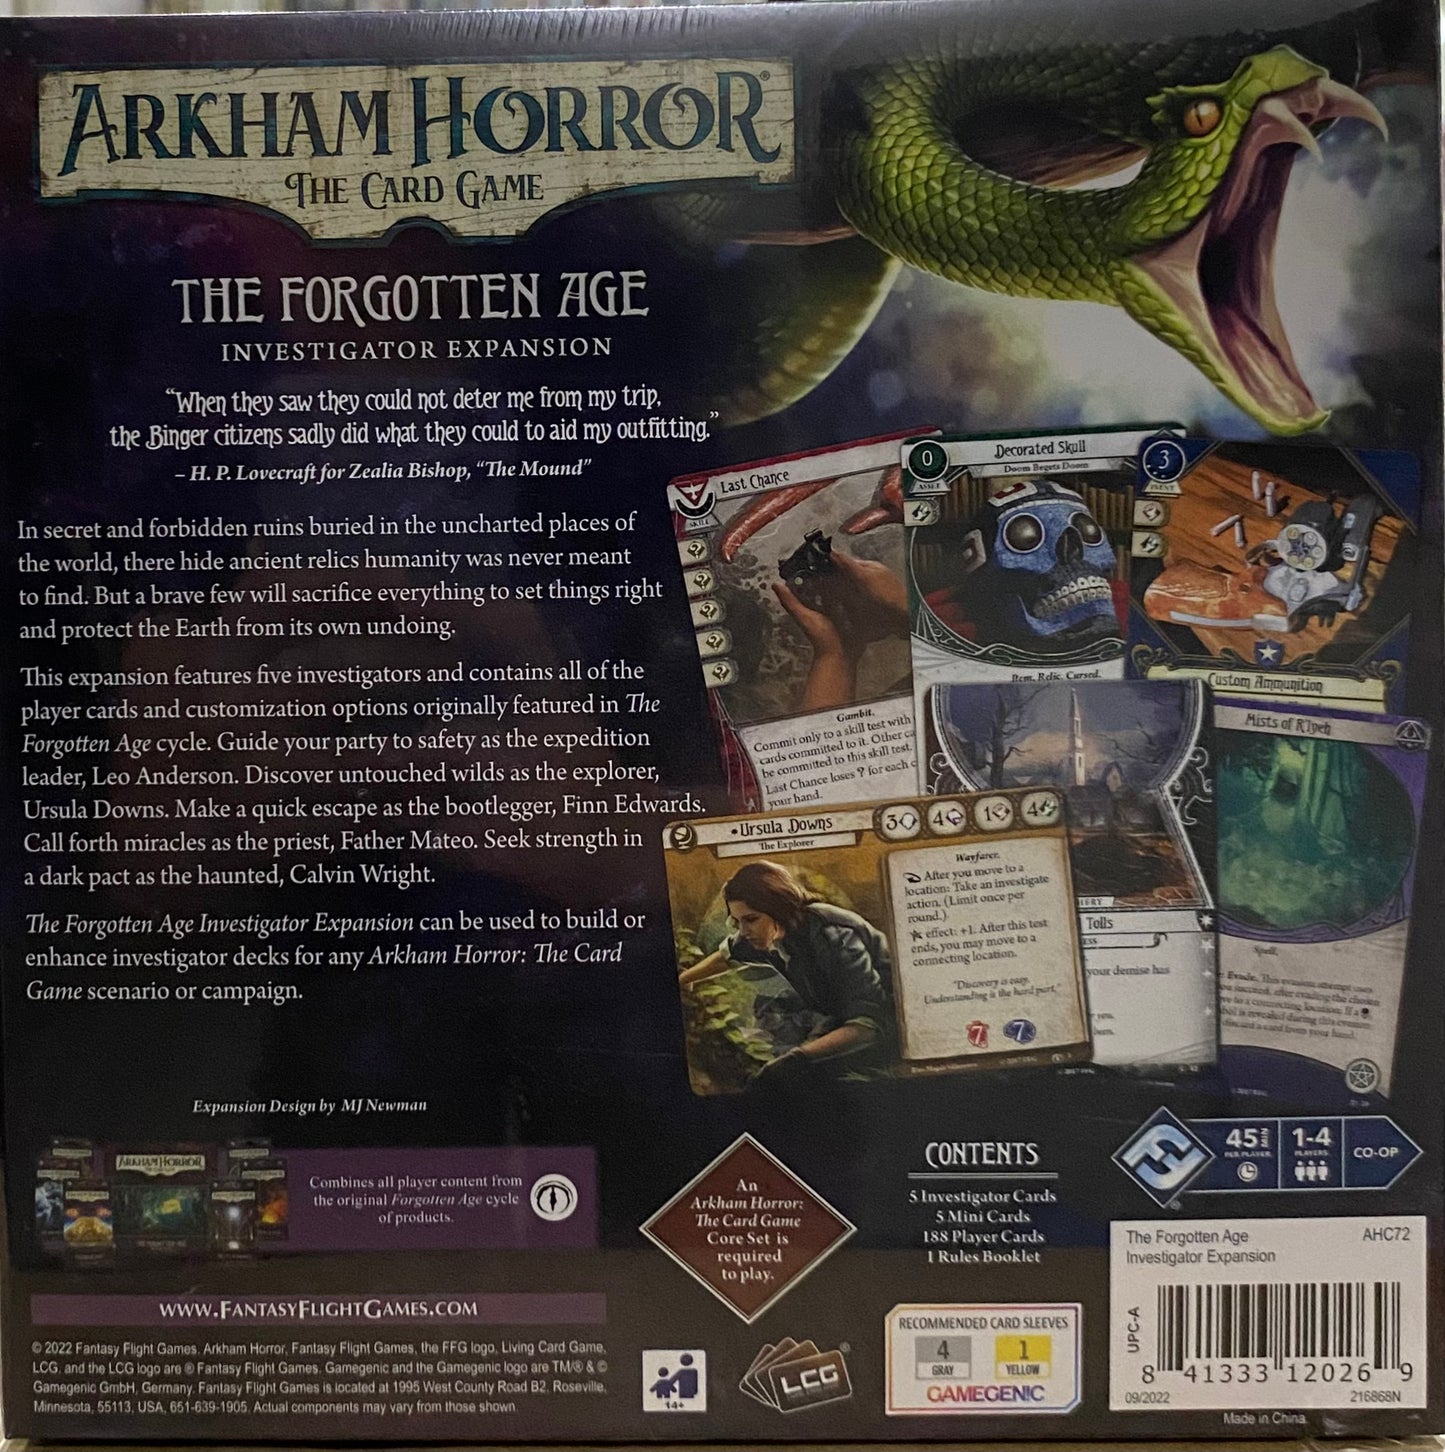 Arkham Horror: The Card Game – Forgotten Age Investigator Expansion